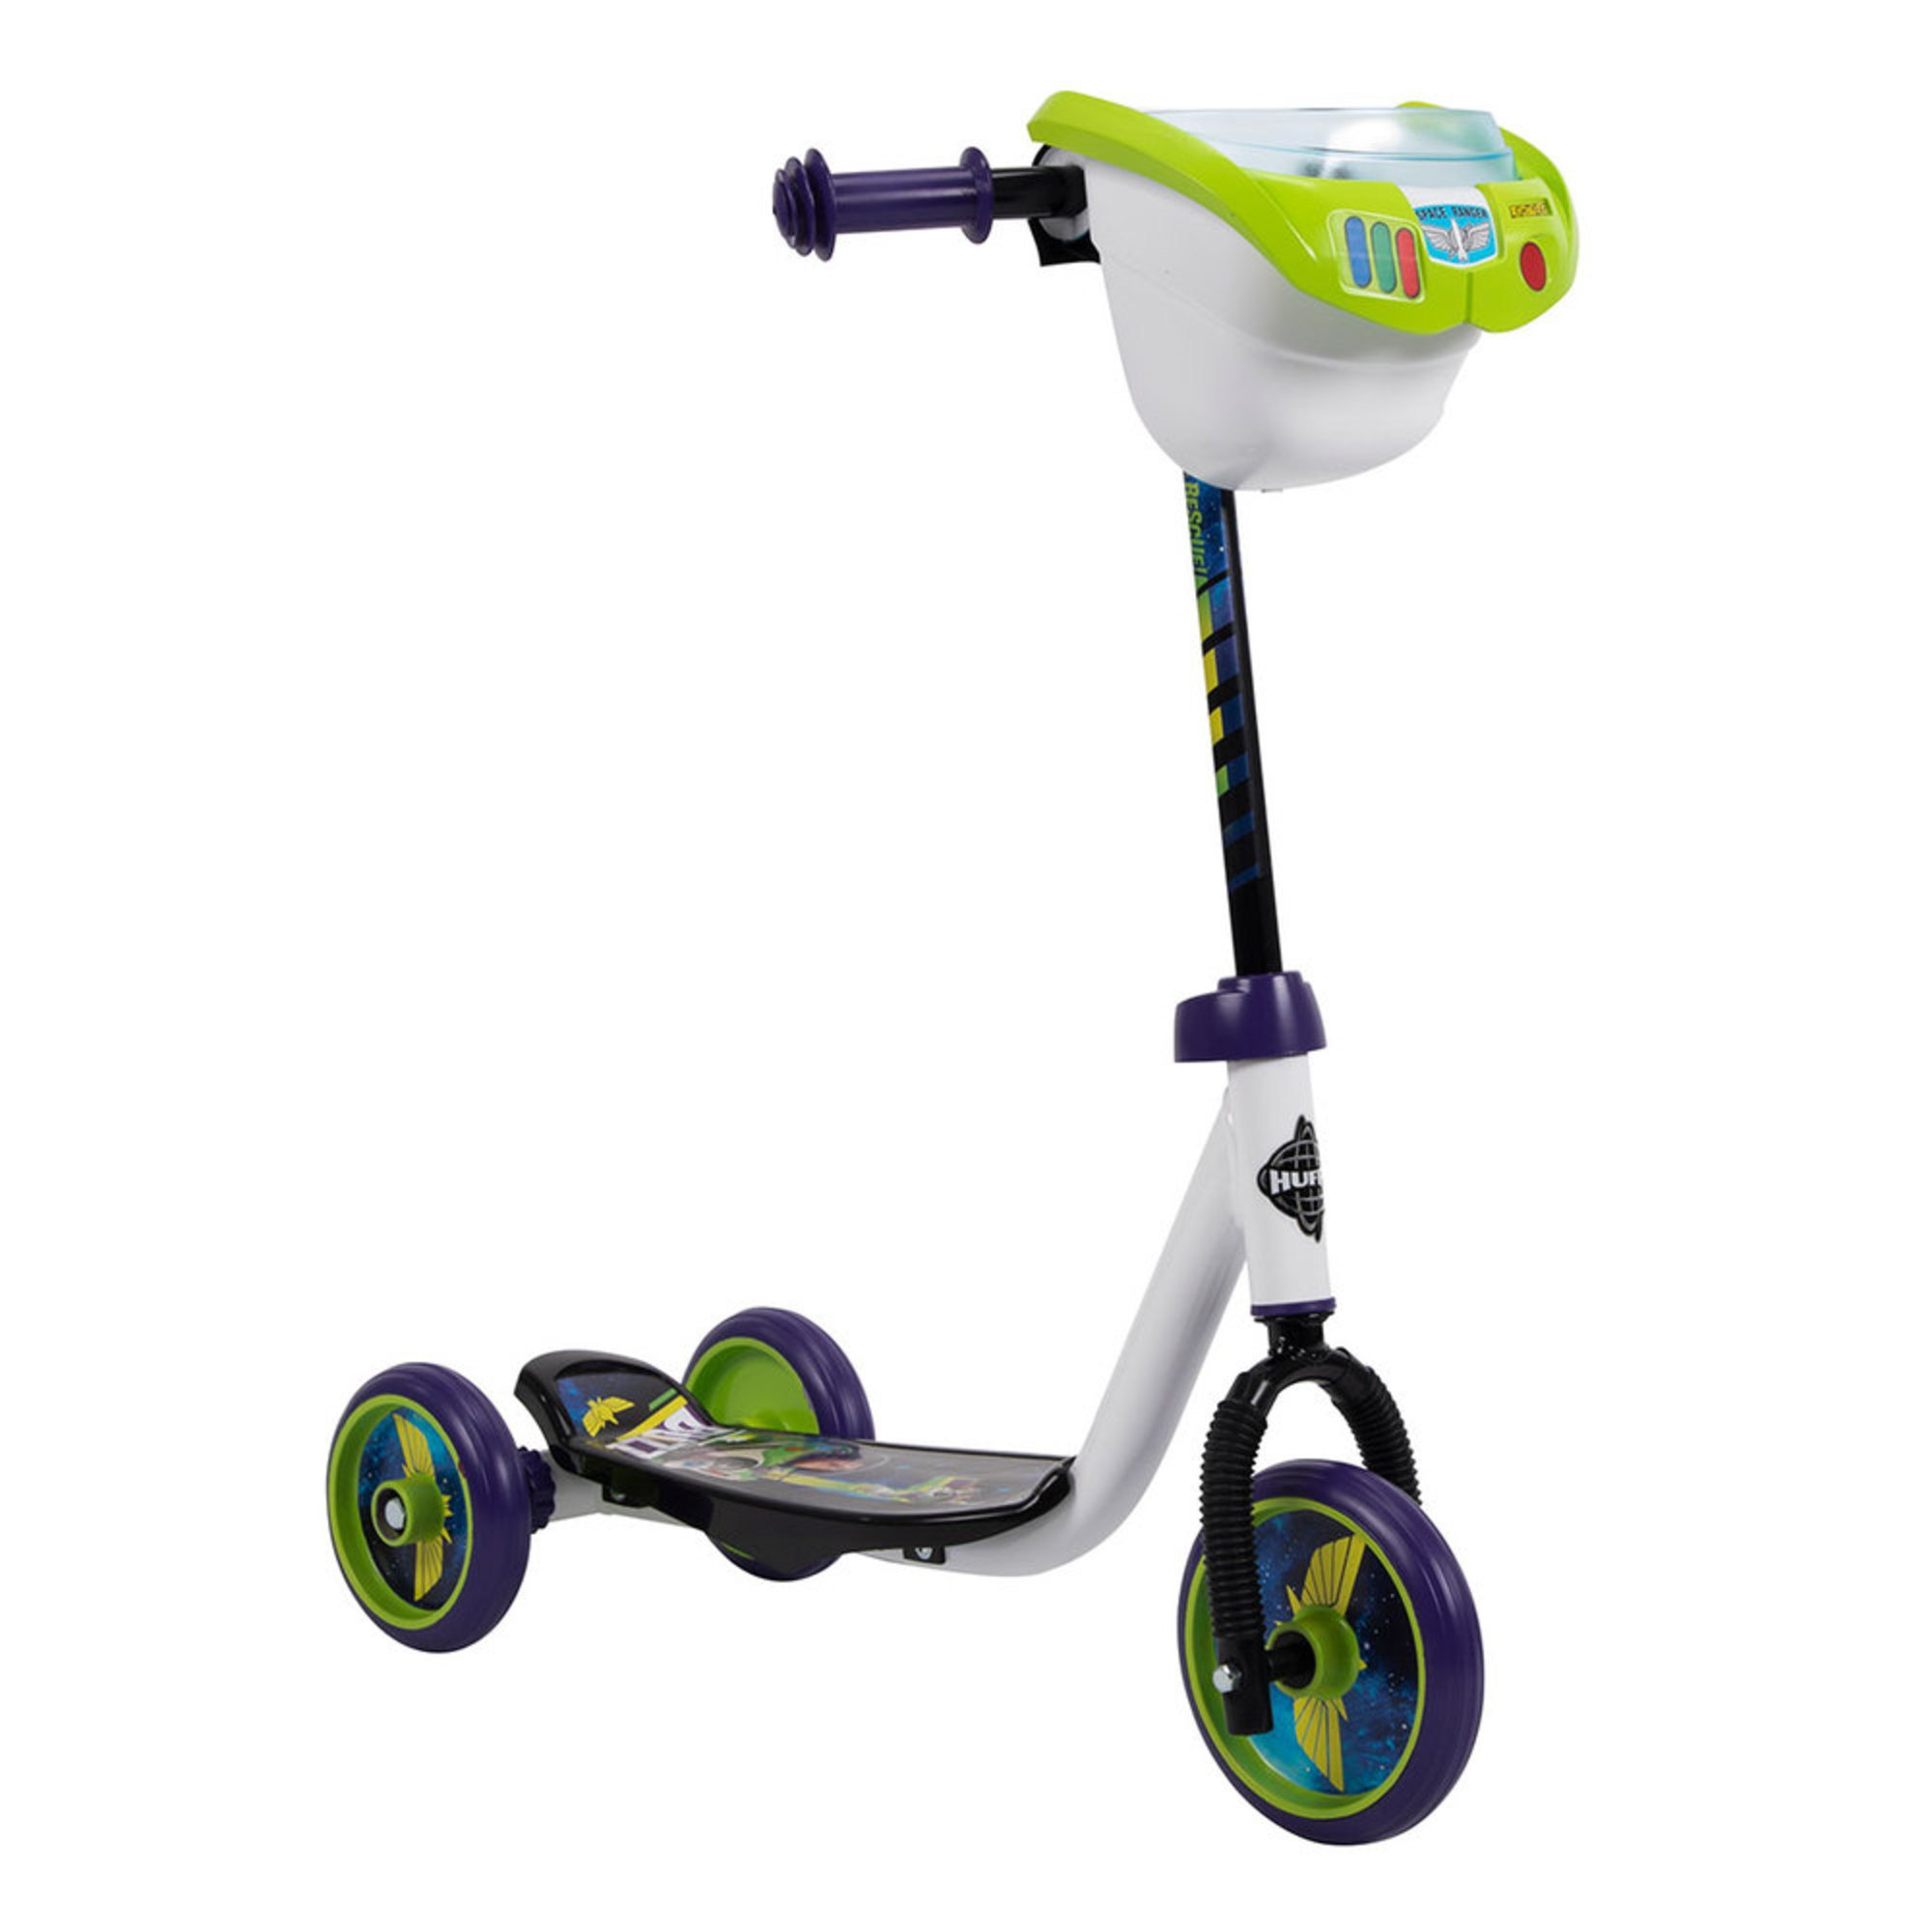 toy story scooter 3 wheels